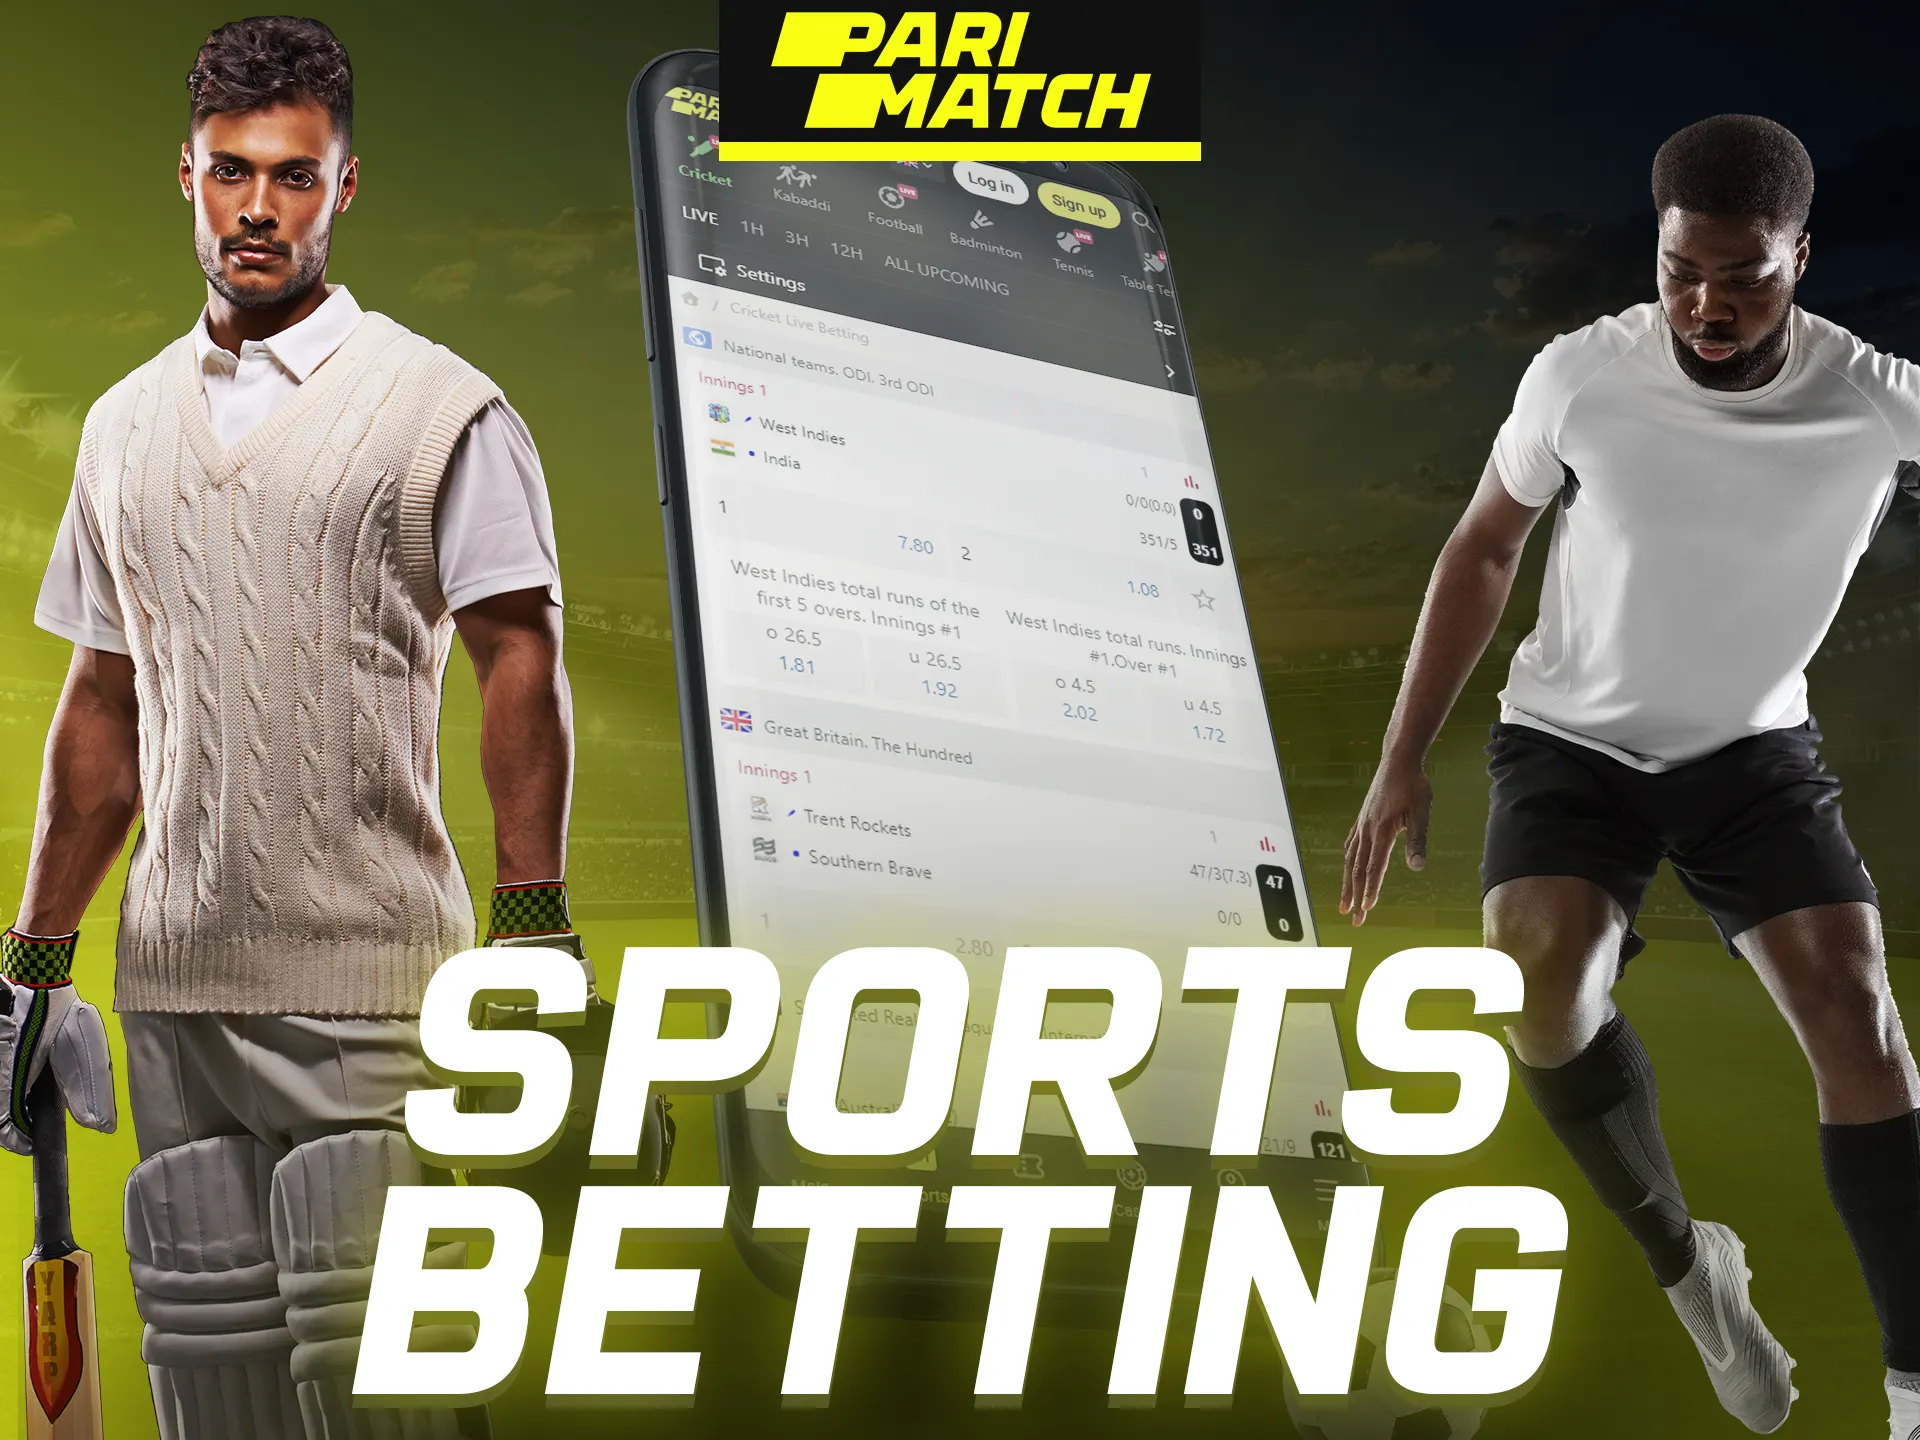 Bet on sports on the Parimatch mobile app.